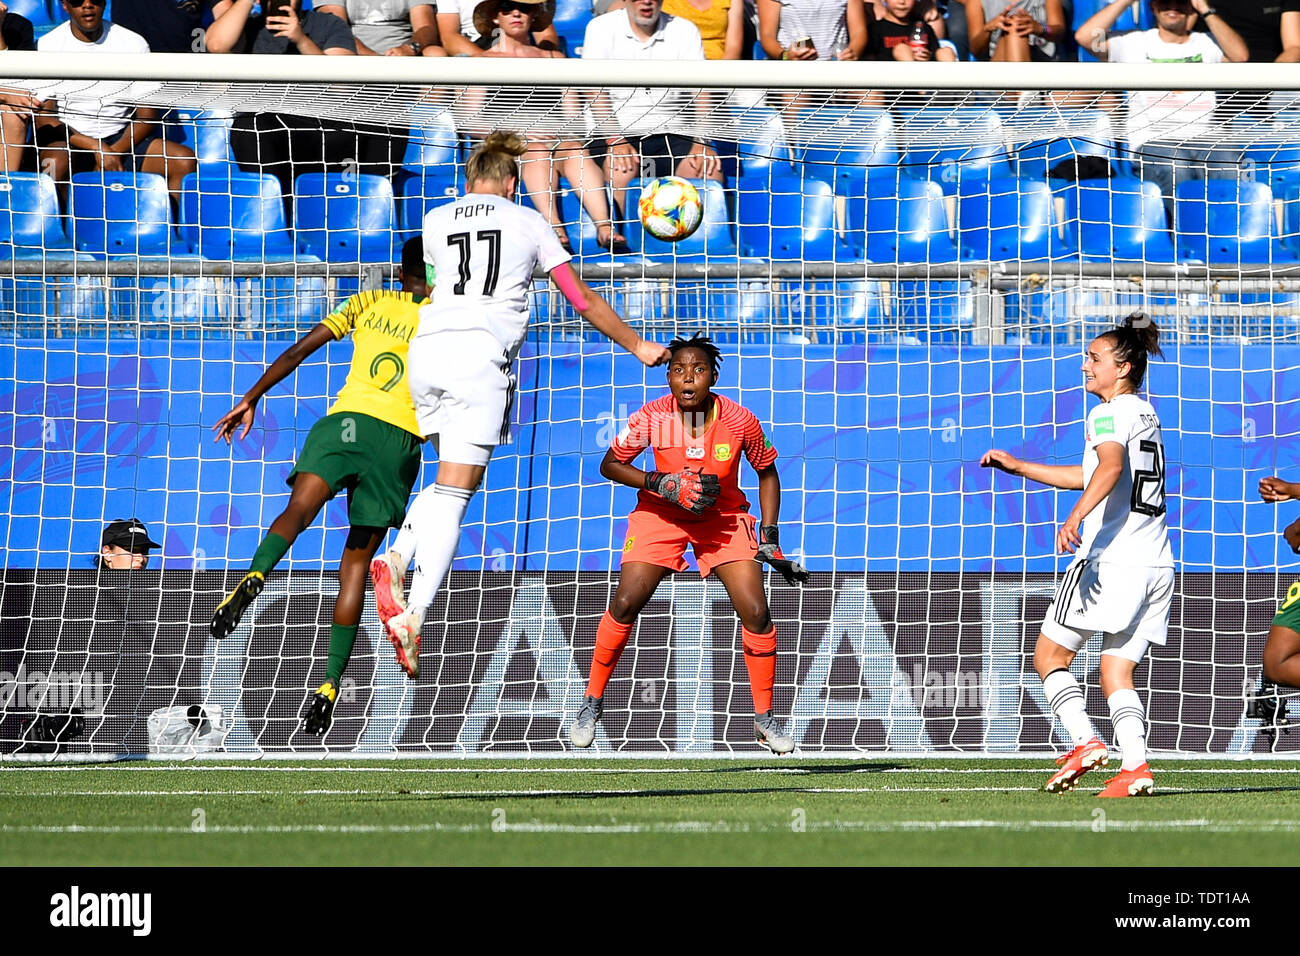 Montpellier. 17th June, 2019. Alexandra Popp (2nd L) of Germany scores during the group B match between Germany and South Africa at the 2019 FIFA Women's World Cup in Montpellier, France on June 17, 2019. Credit: Chen Yichen/Xinhua/Alamy Live News Stock Photo